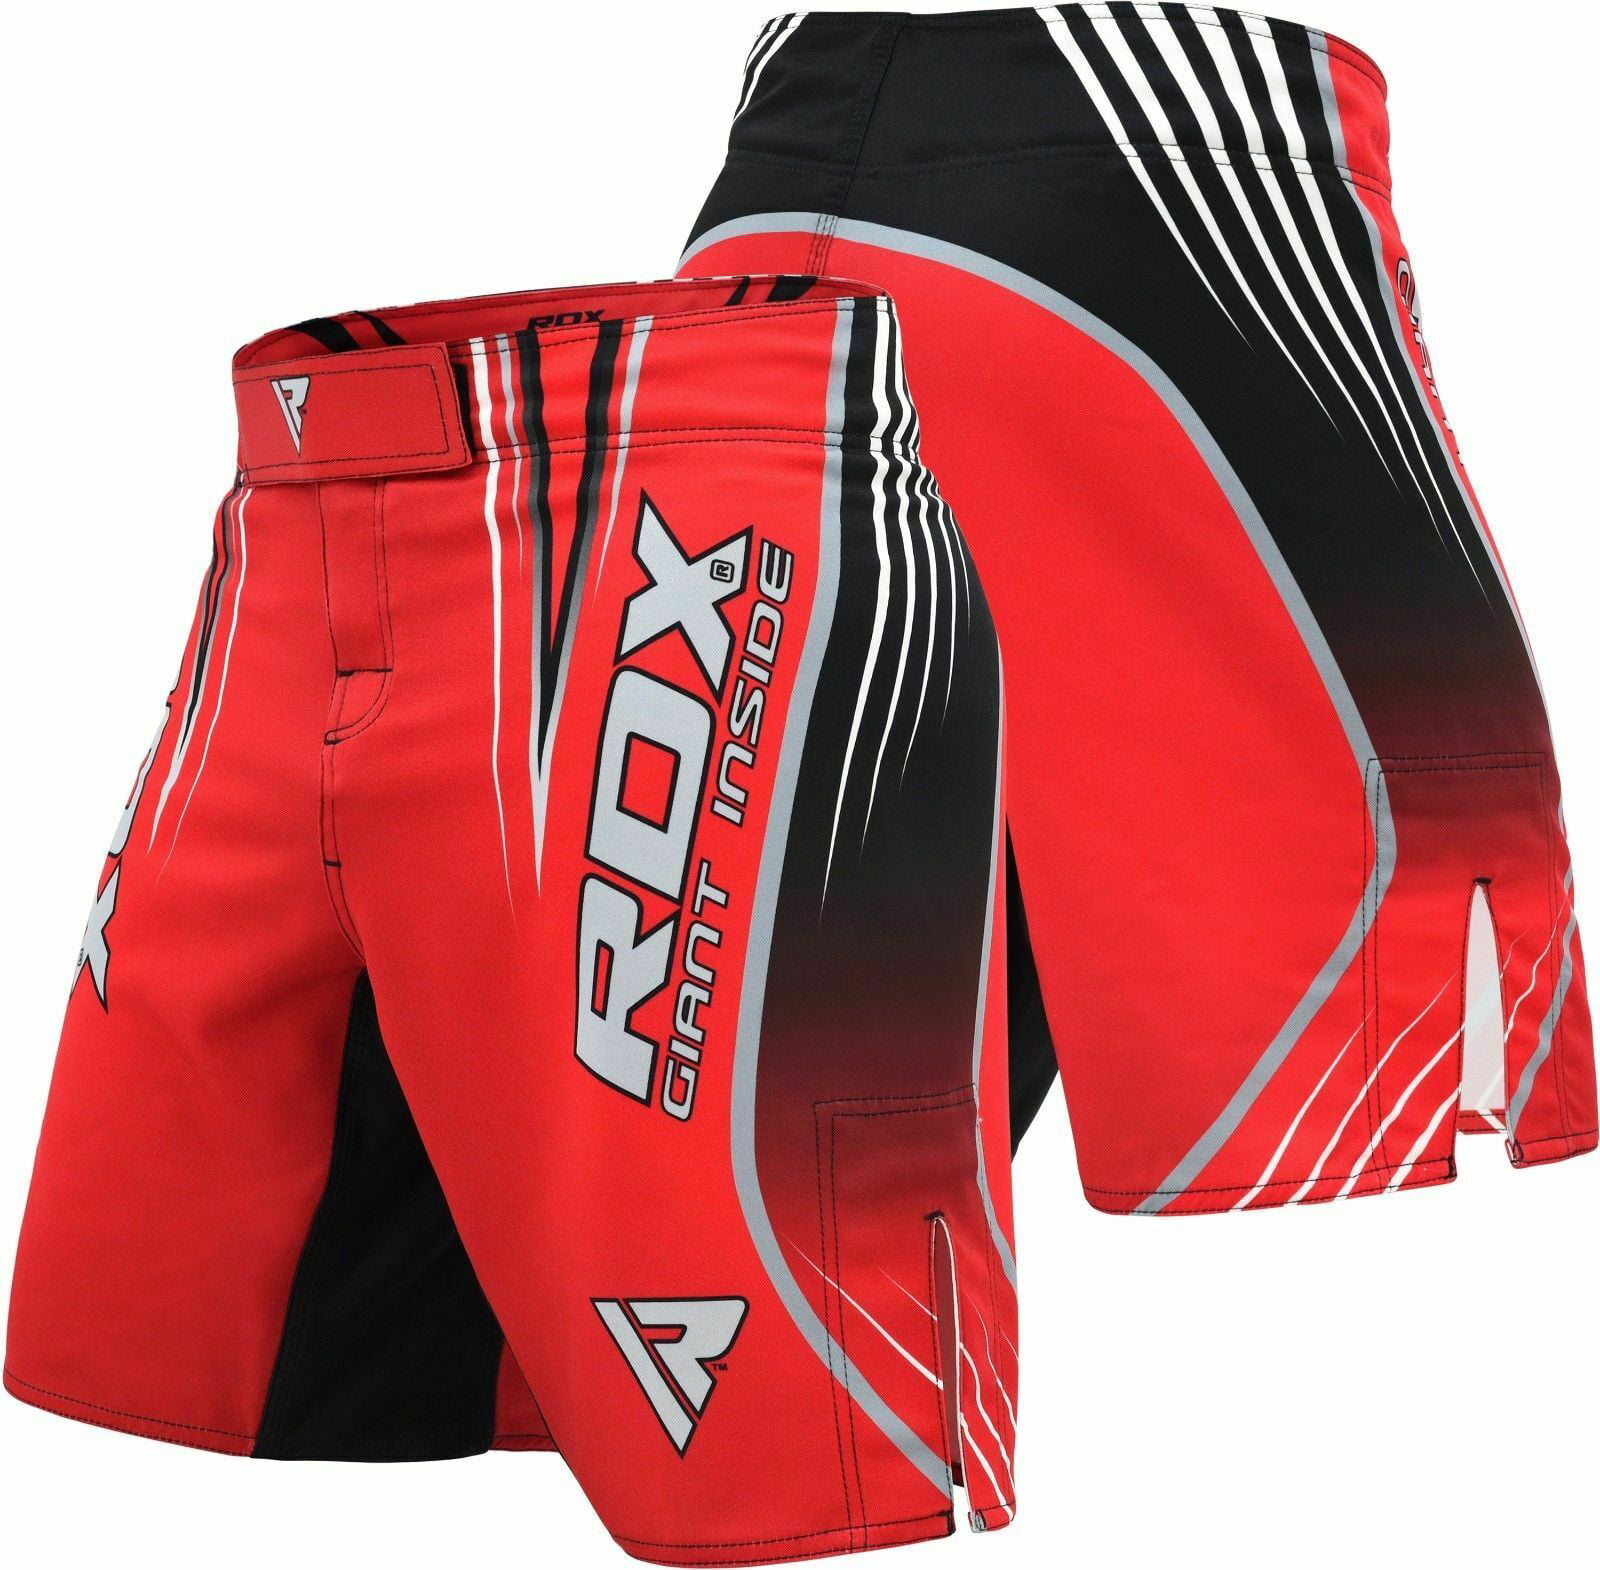 Brand New MMA Fight Shorts Grappling Short Kick Boxing Cage Fighting Shorts 